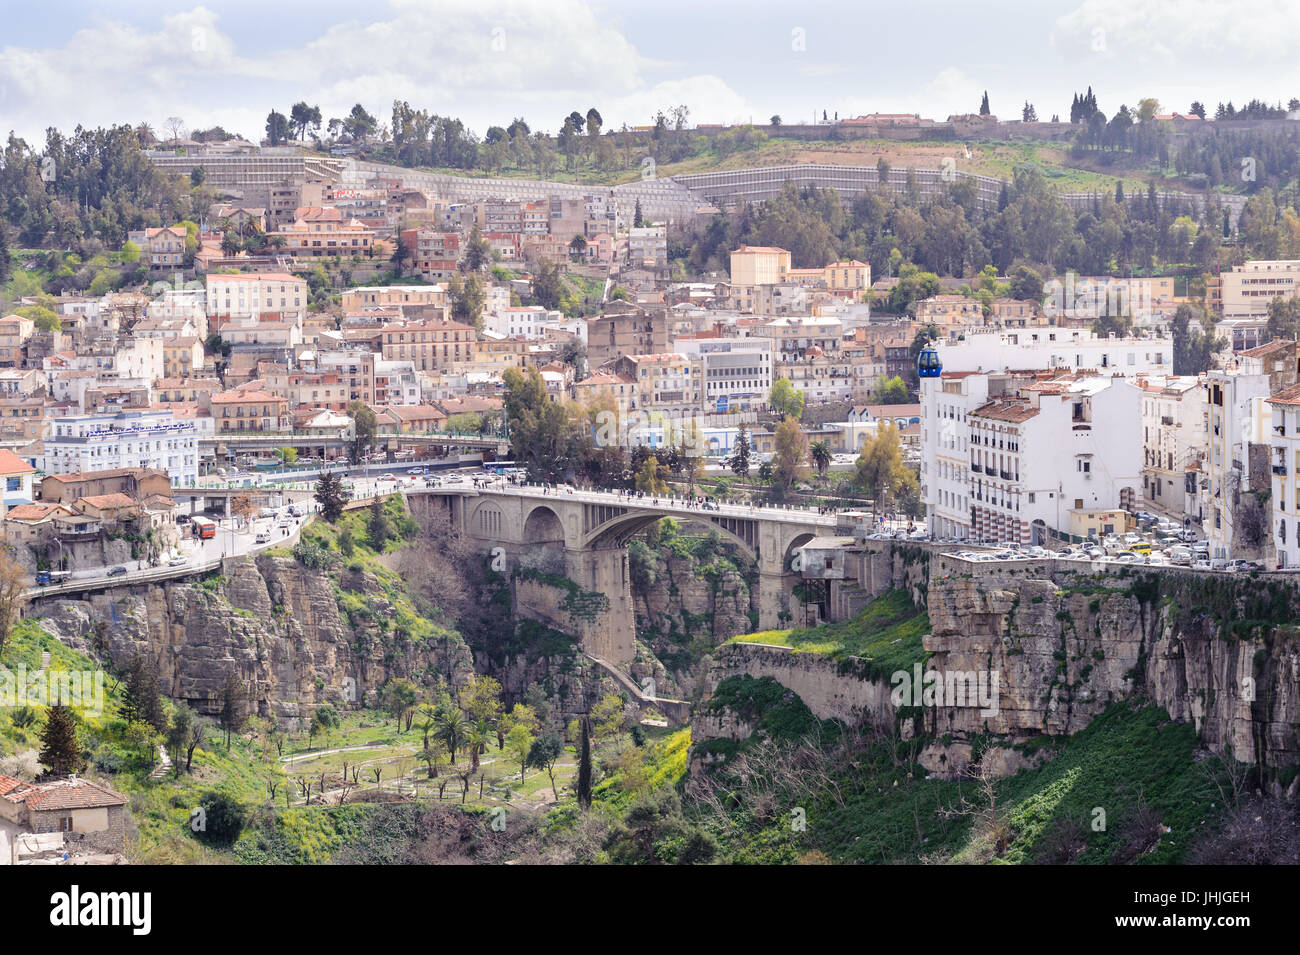 cityscape of Ottoman, French and Spanish colonial side of the city of Constantine, Algeria. Stock Photo